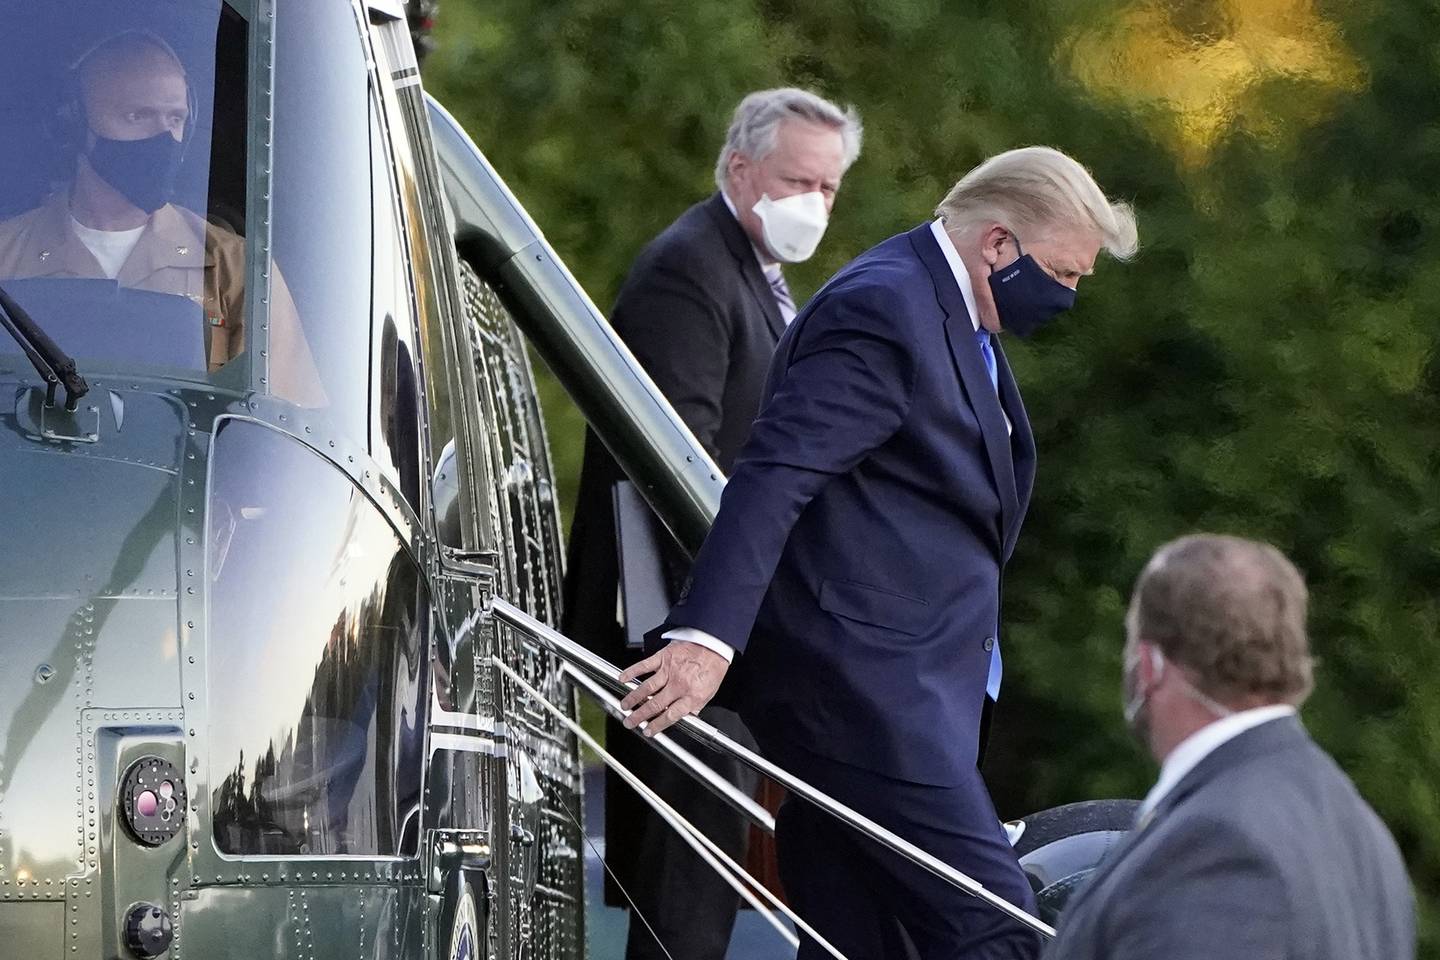 President Donald Trump arrives at Walter Reed National Military Medical Center, in Bethesda, Md., Friday, Oct. 2, 2020, on Marine One helicopter after he tested positive for COVID-19.